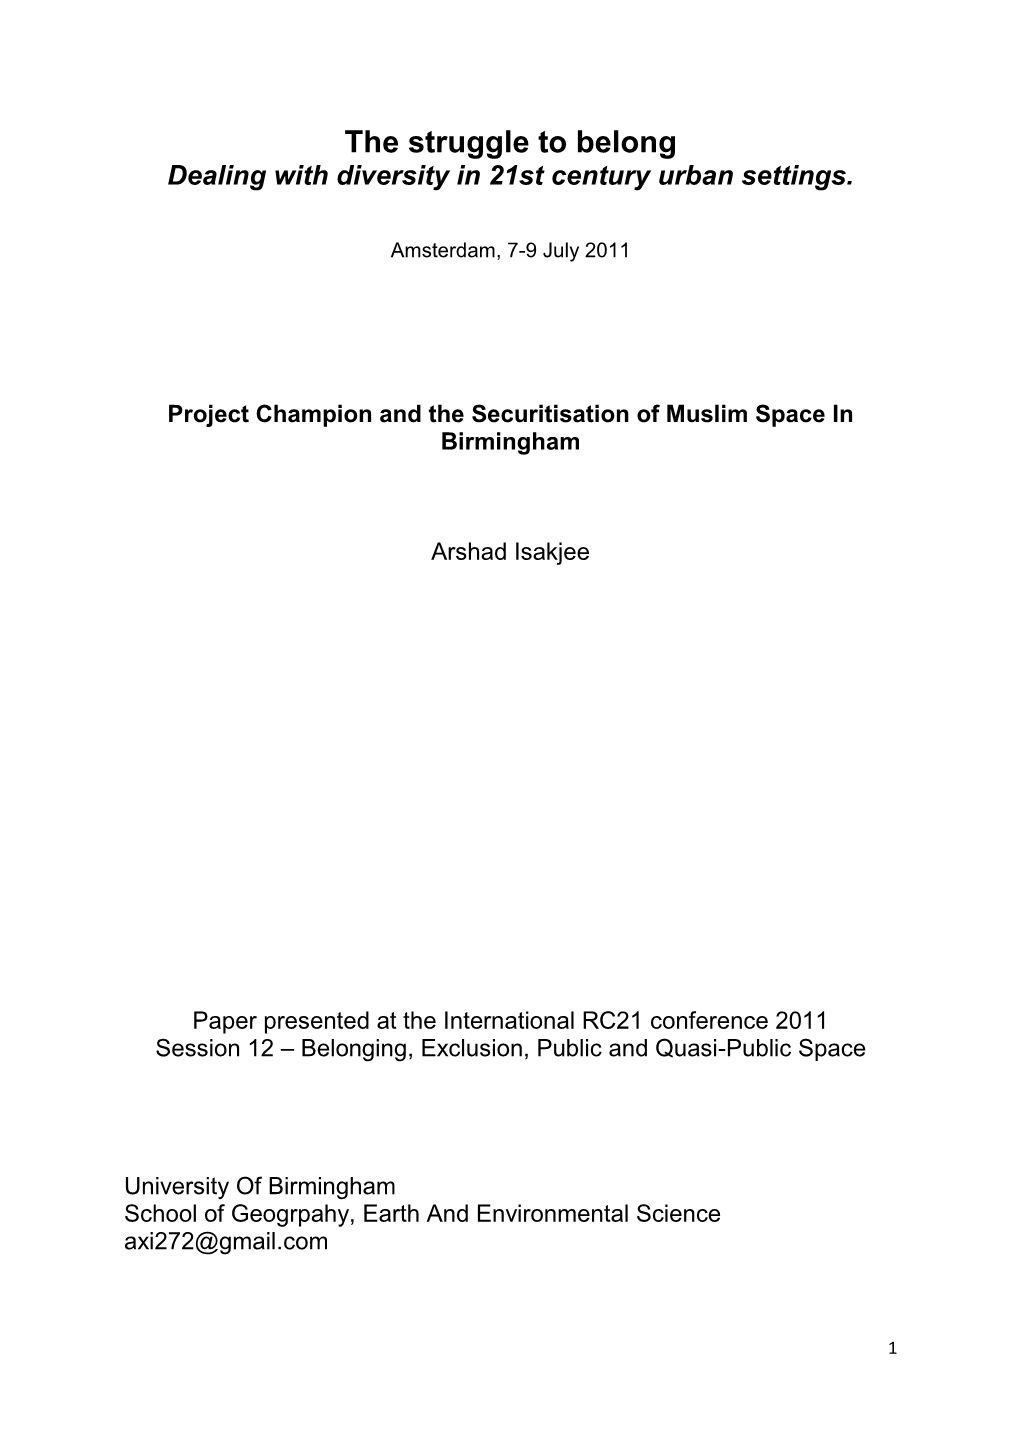 Project Champion and the Securitisation of Muslim Space in Birmingham